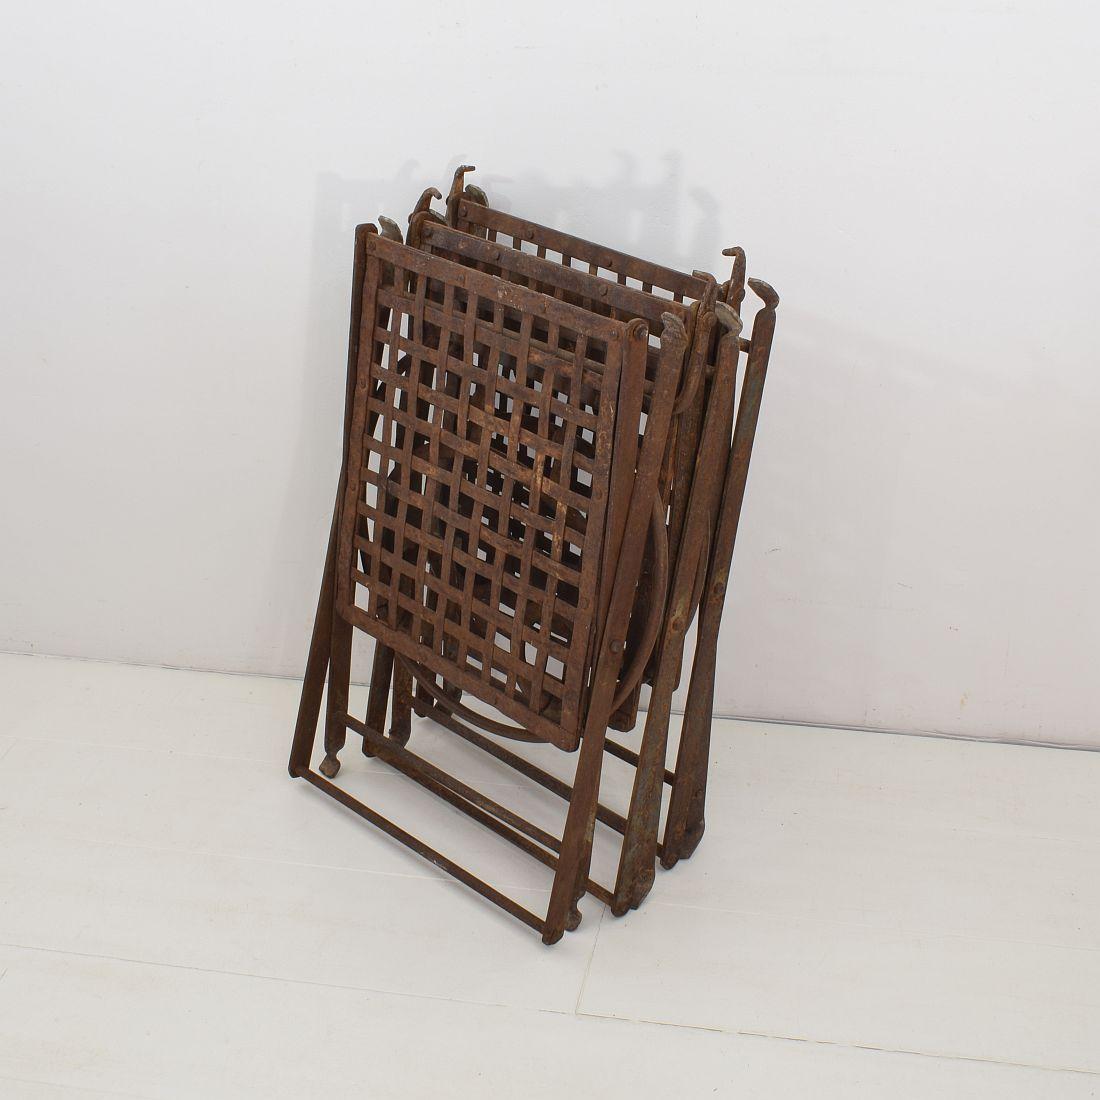 Pair of 19th Century French Iron Folding Garden Chairs with Small Table/Stool 16